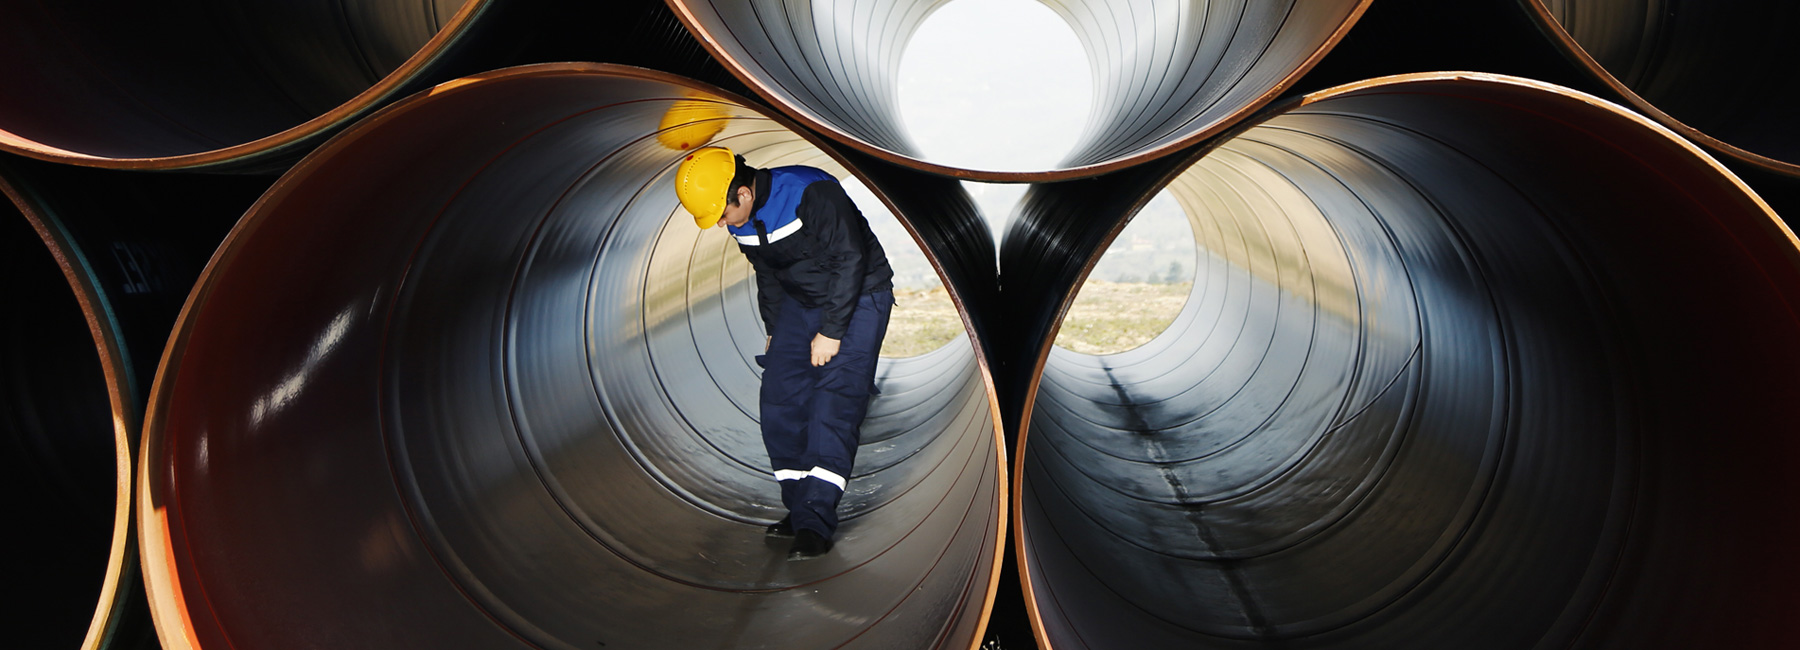 Worker inspecting interior of large pipe, Law Office of John H. Sugden